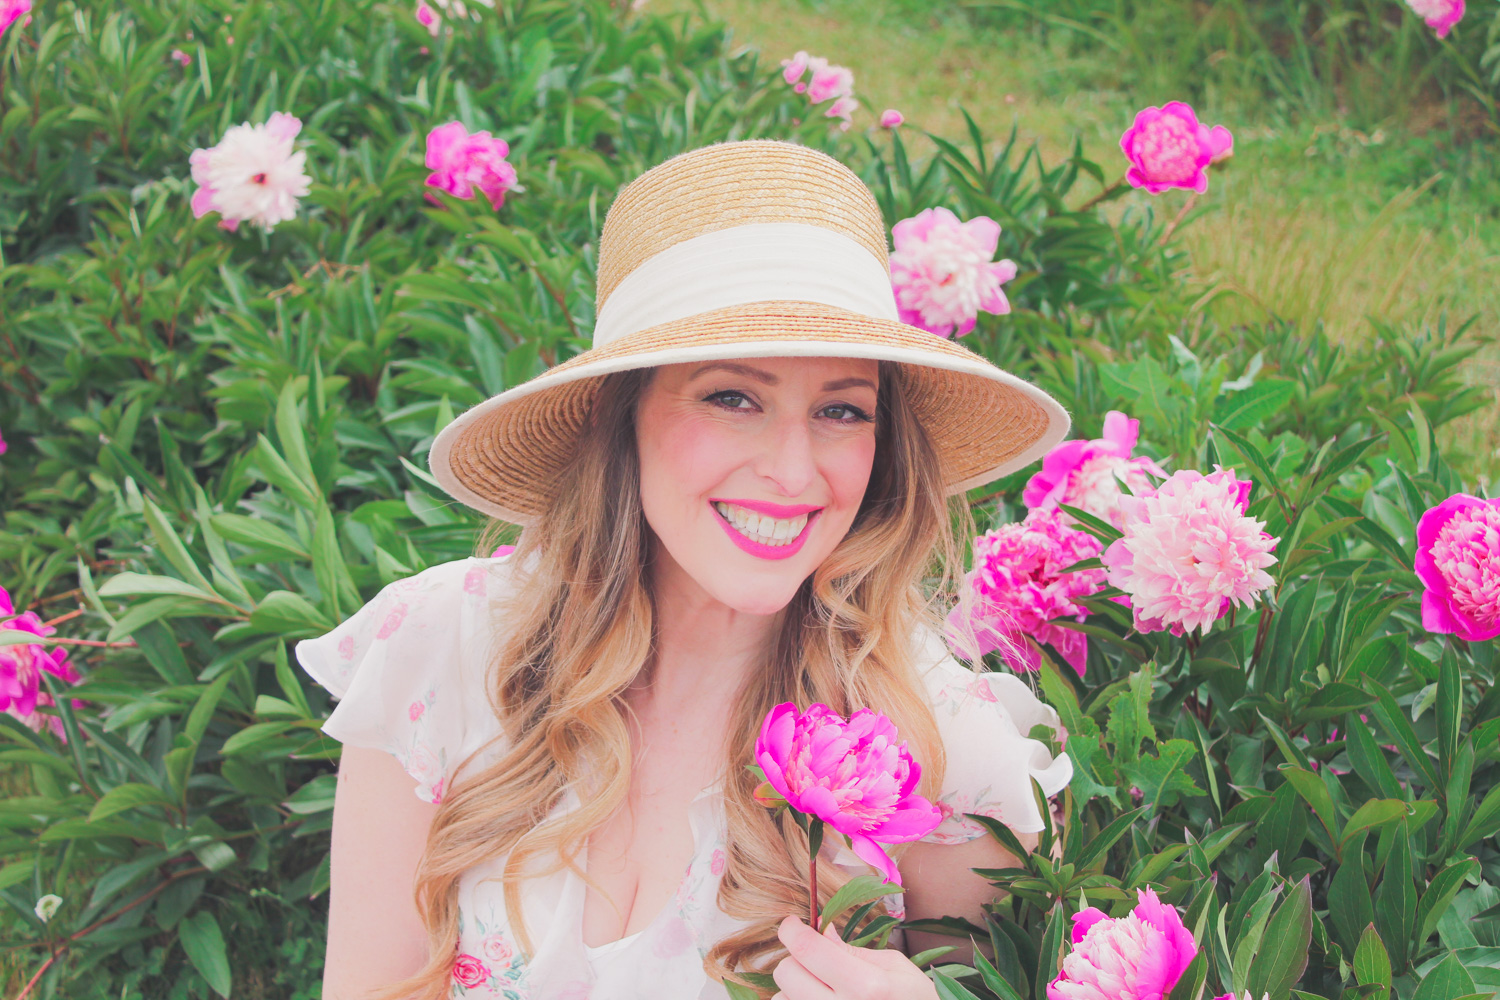 Goldfields Girl standing in the Peony Paddock at Spring Hill Peony Farm wearing an Alannah Hill dress and straw hat